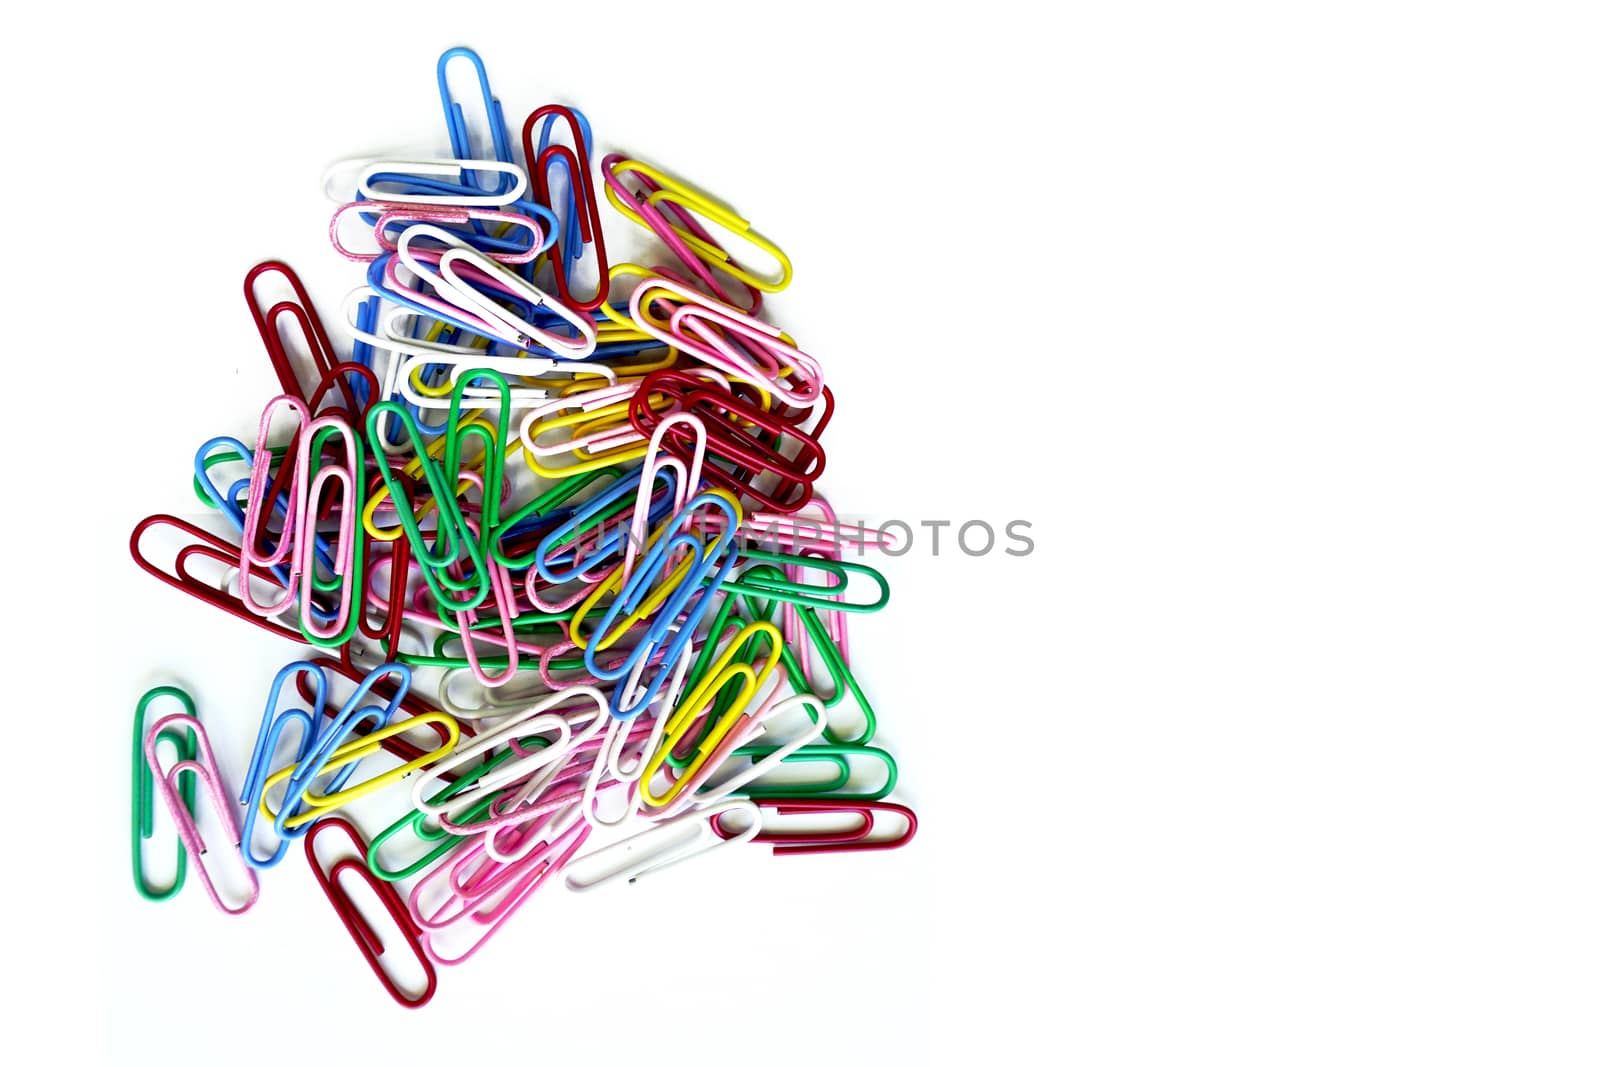 colorclips random stationery office supply for business isloated